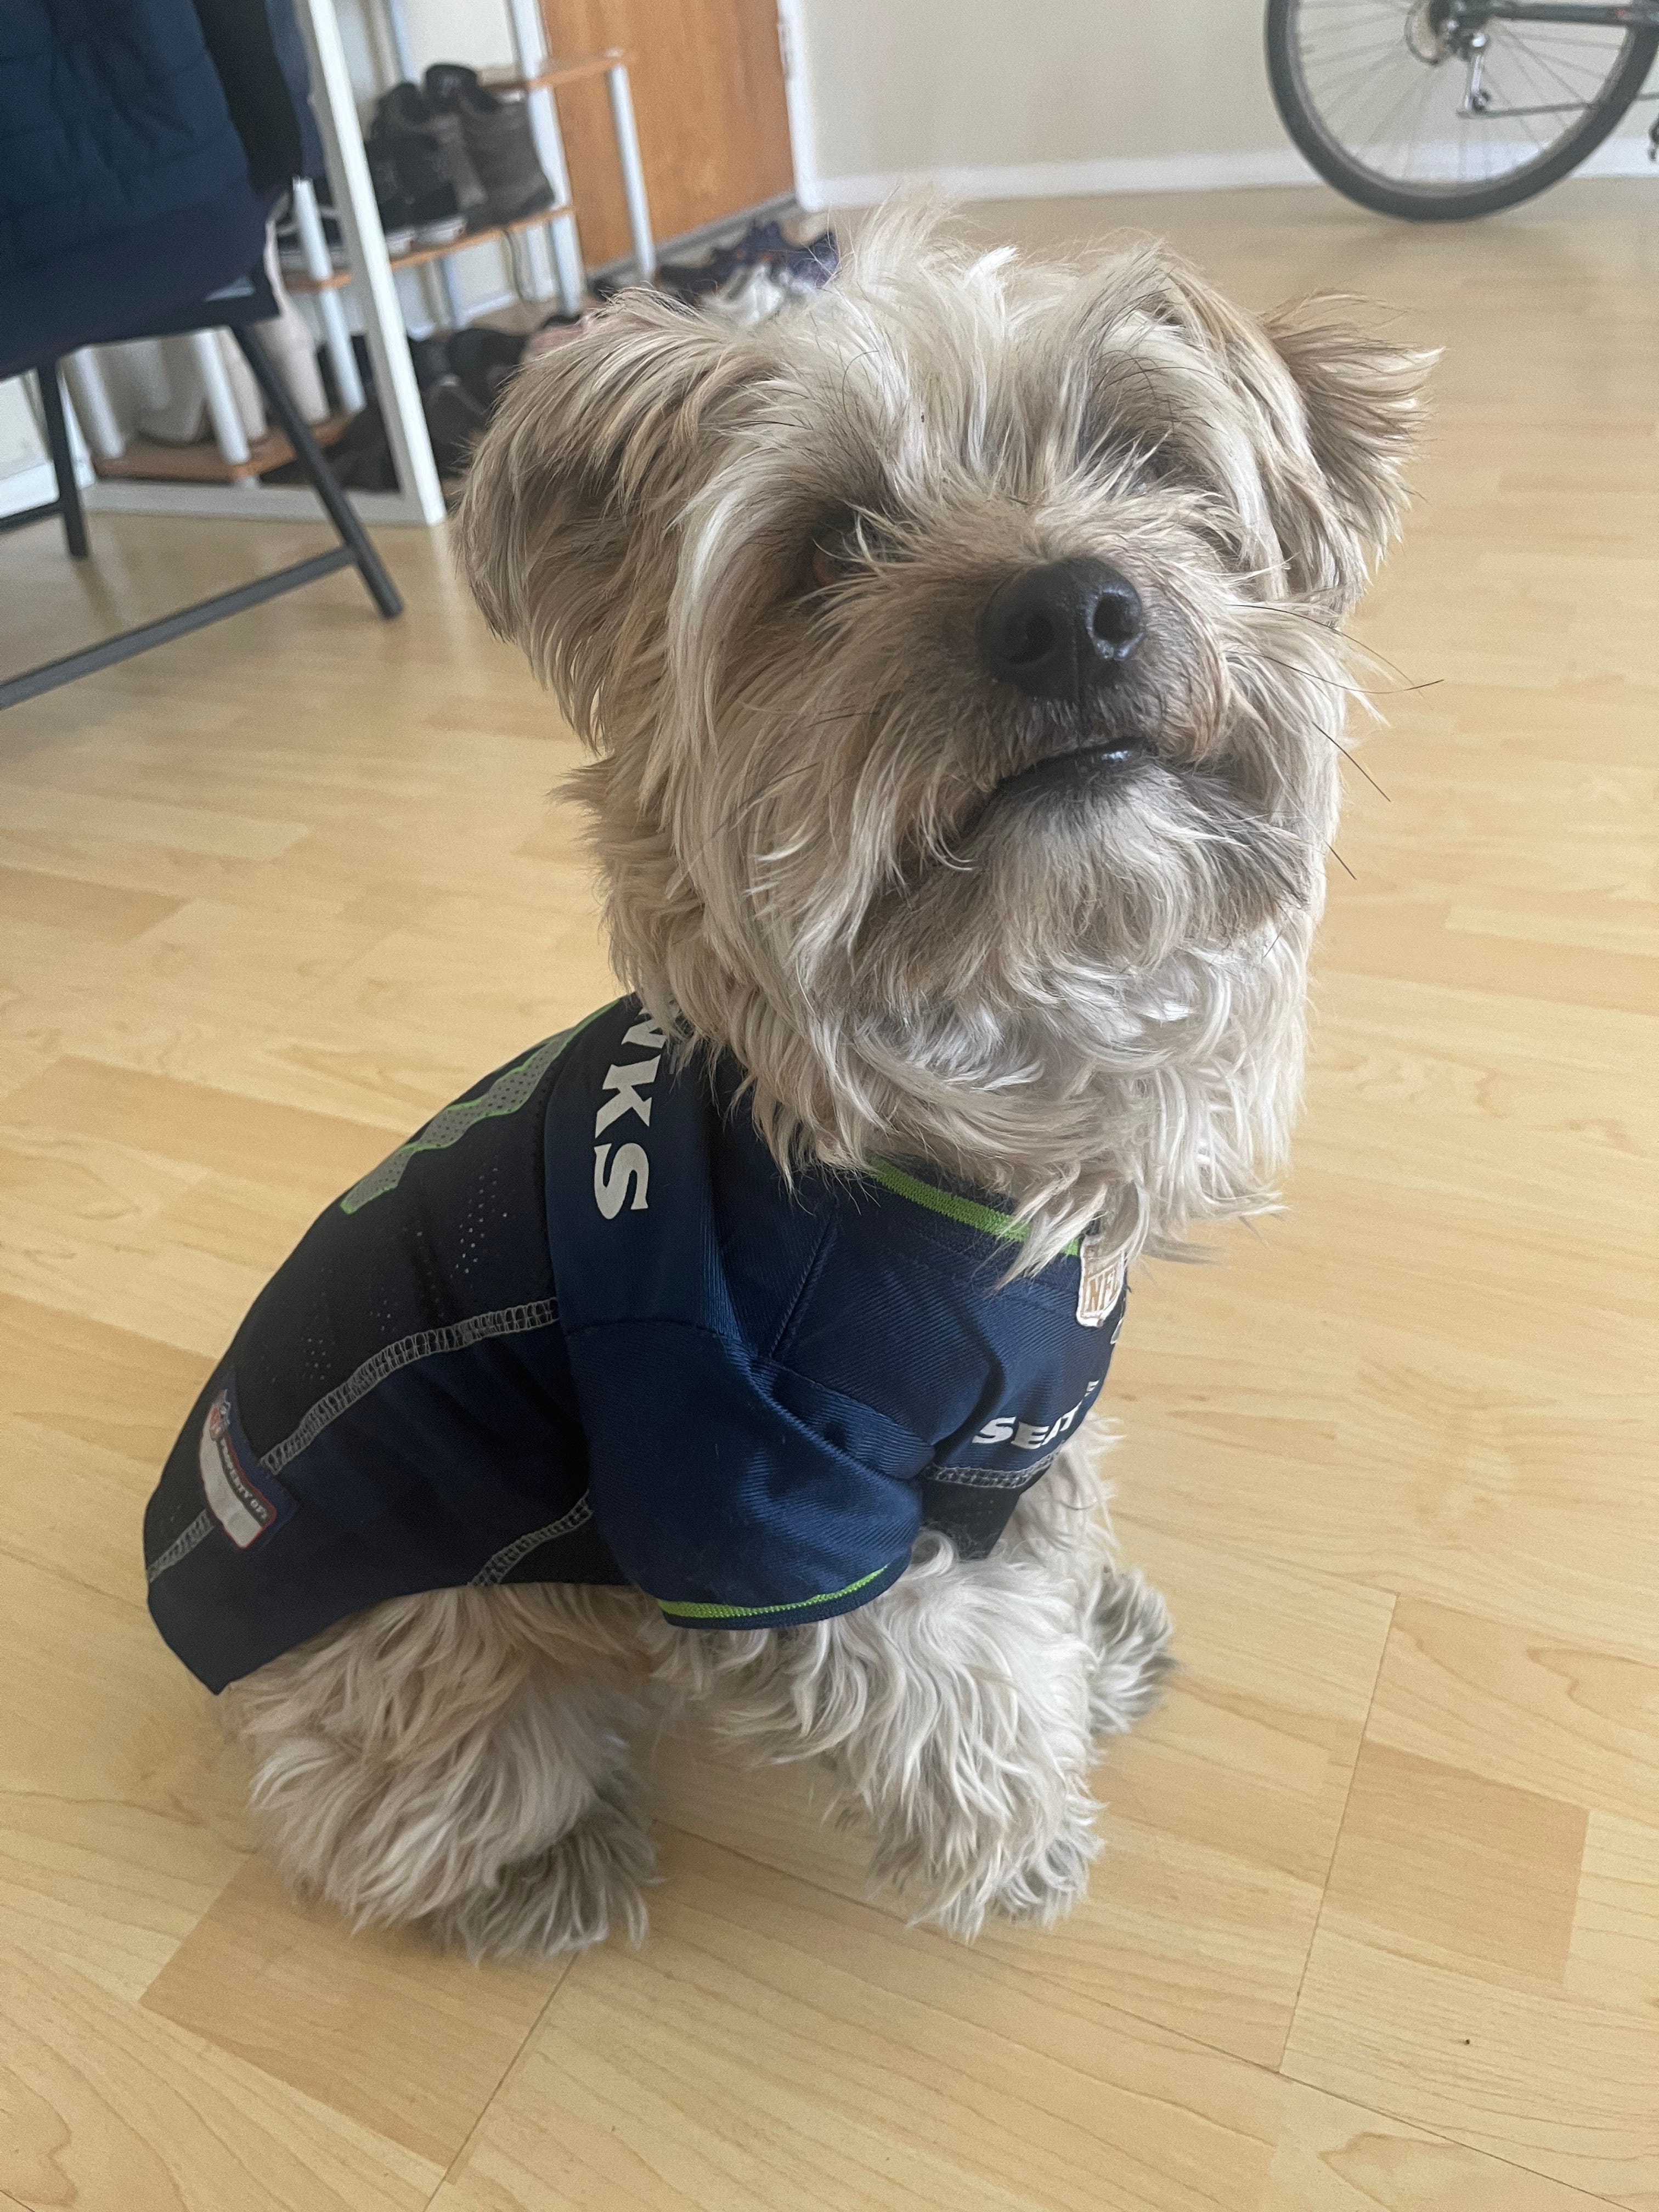 seahawks puppy clothes